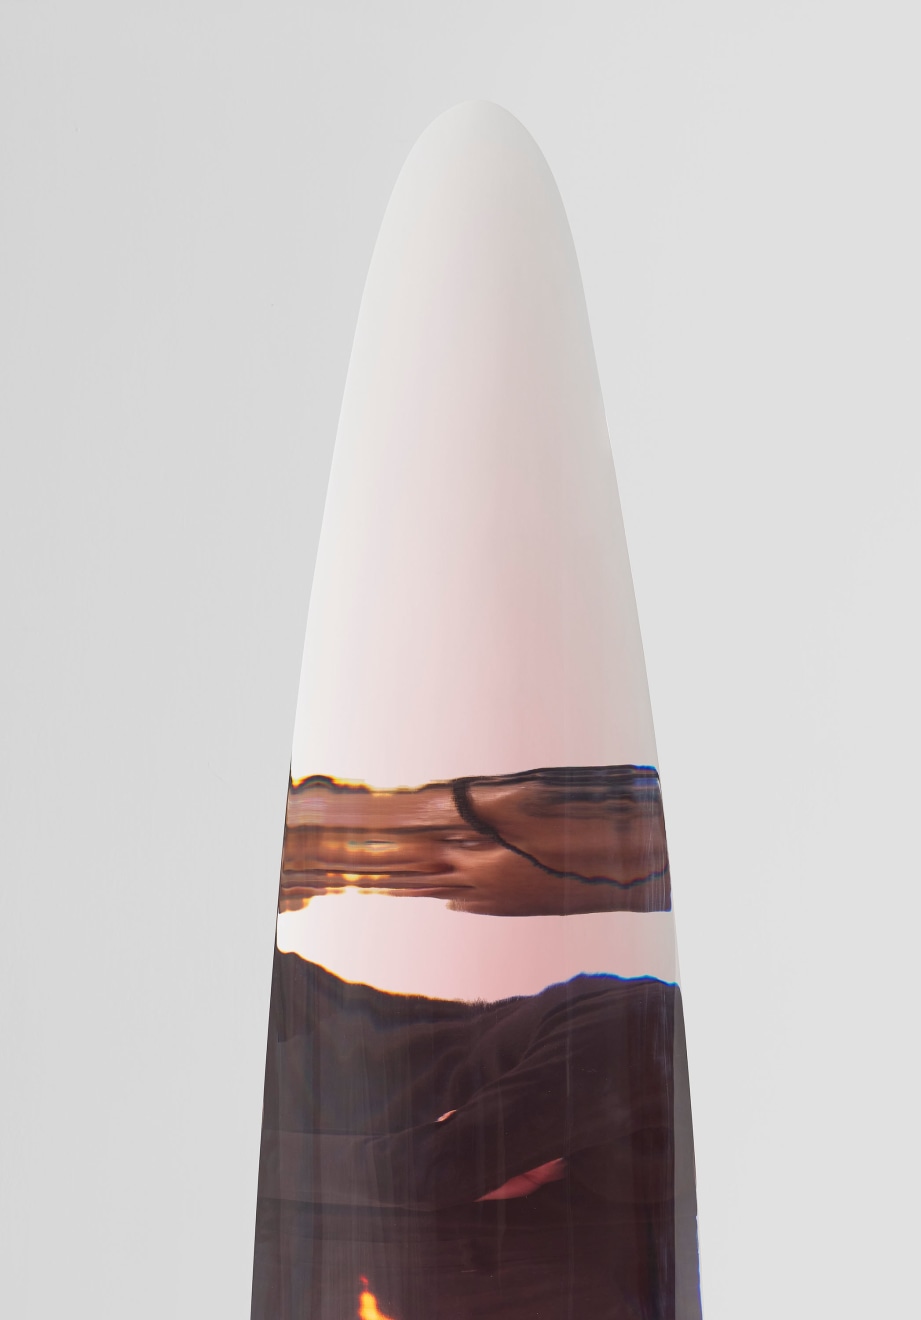 Fred Eversley, Untitled (cylindrical lens), 2022